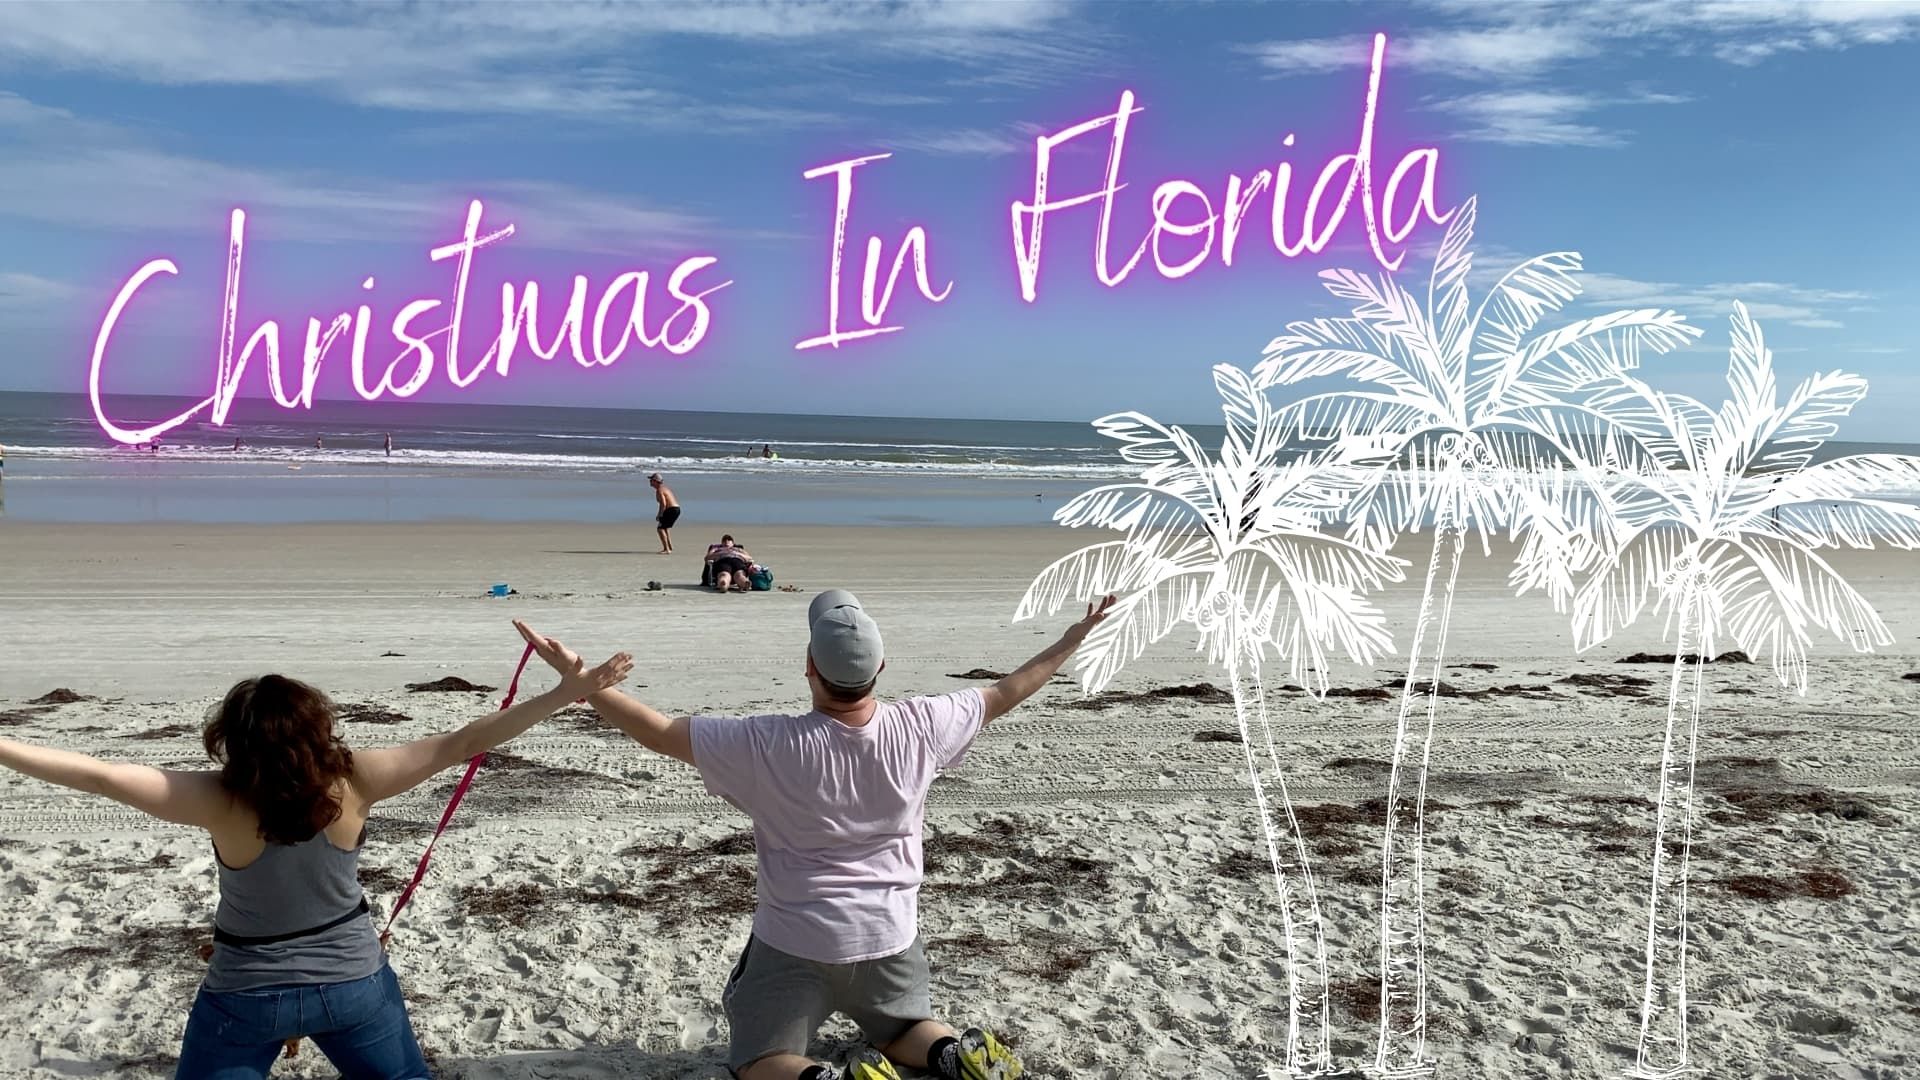 Christmas in Florida background